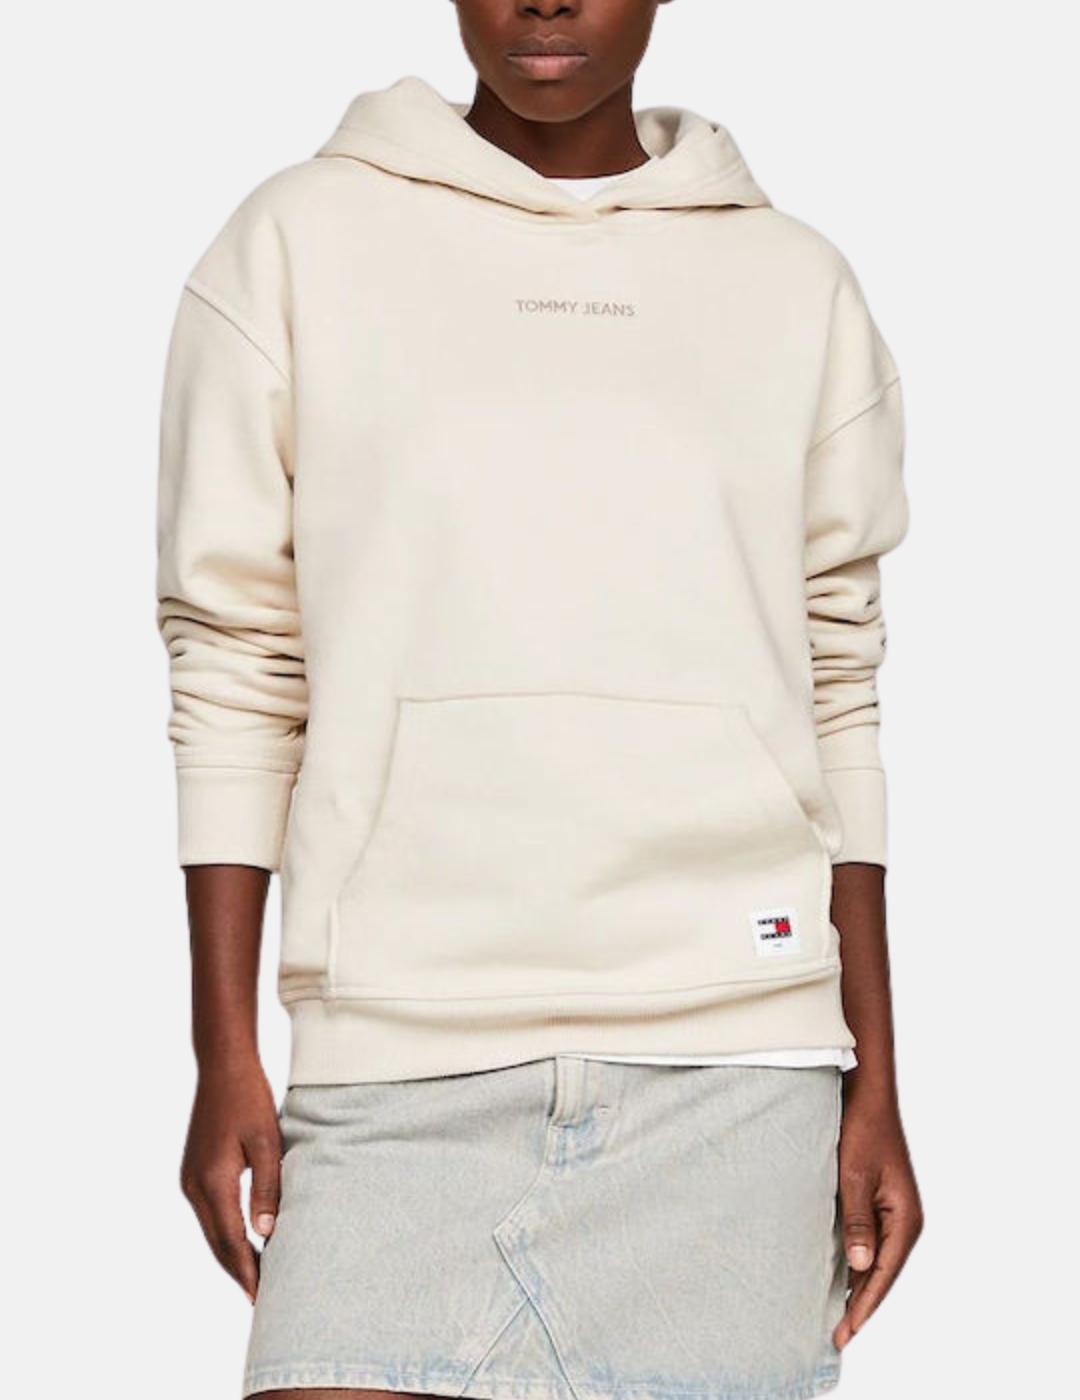 Sudadera Tommy Jeans RLX beige para mujer